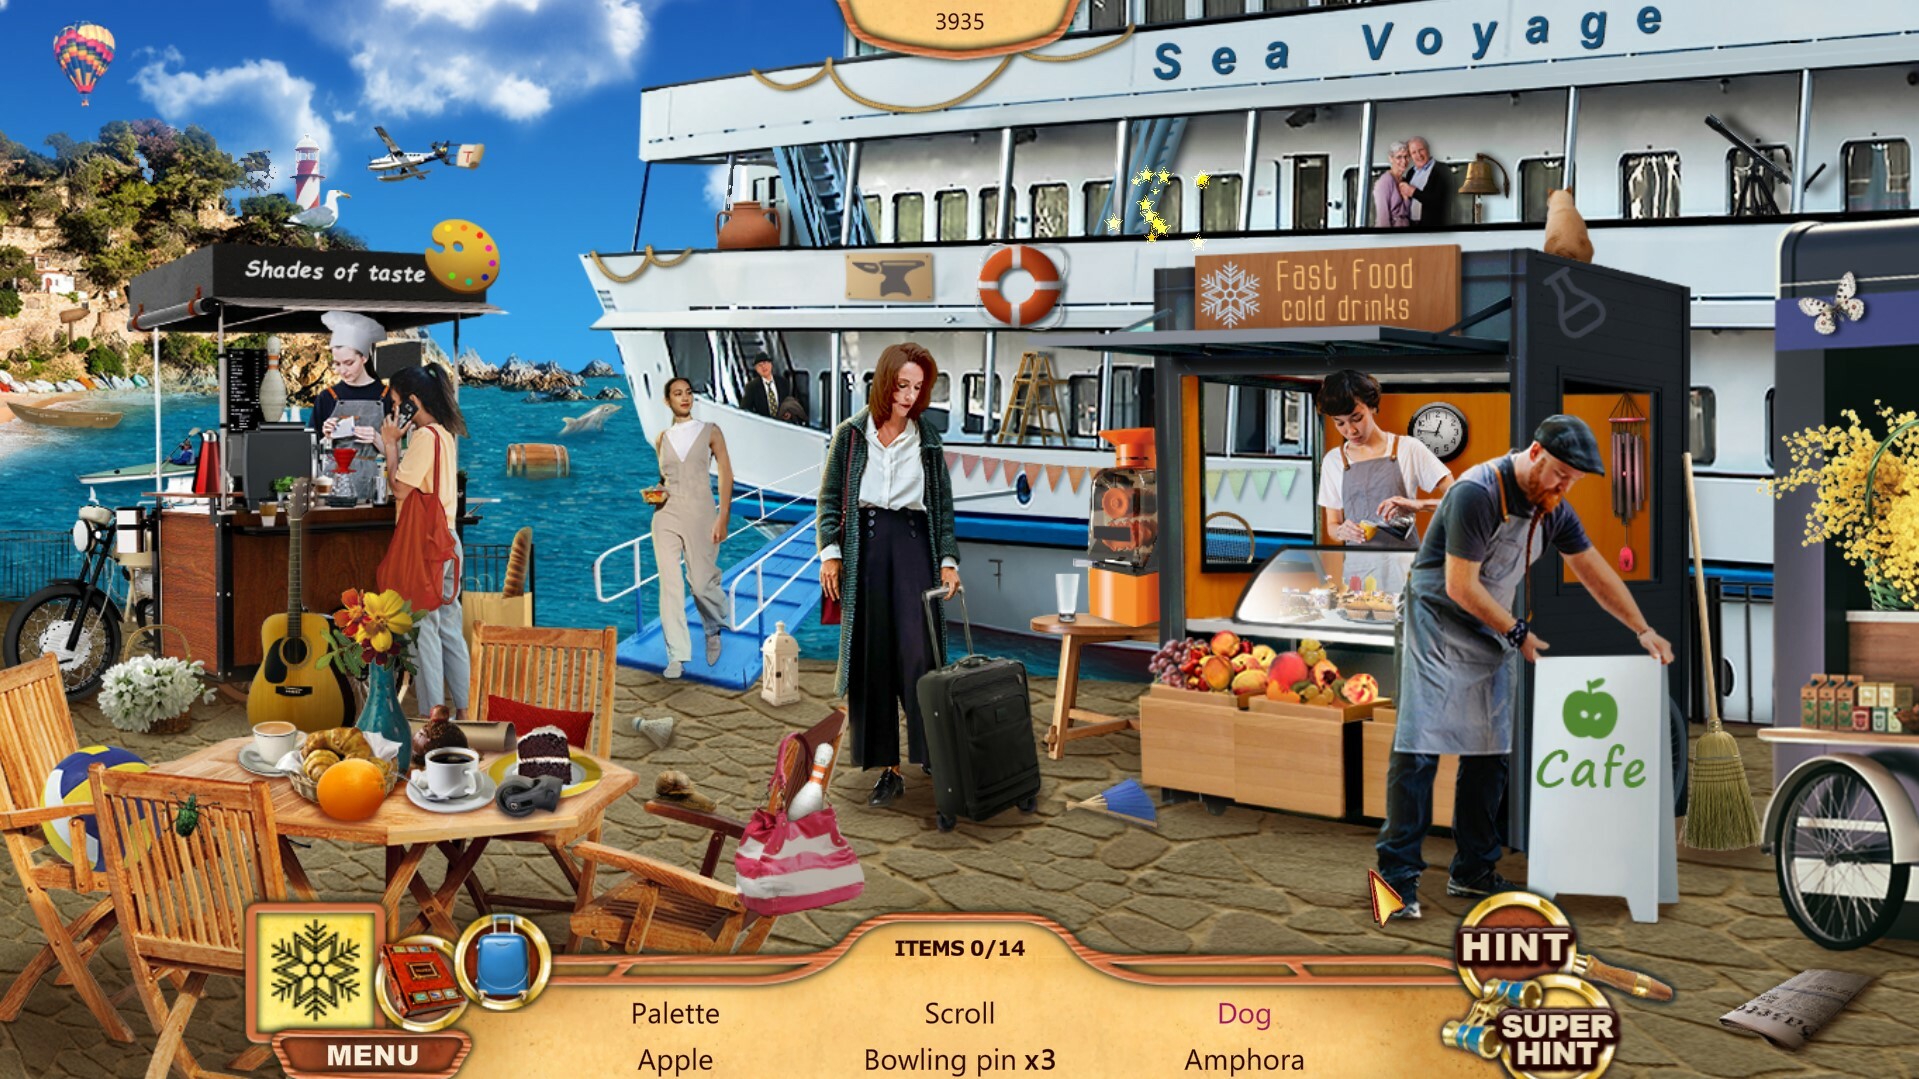 Big Adventure: Trip to Europe 3 - Collector's Edition Free Download